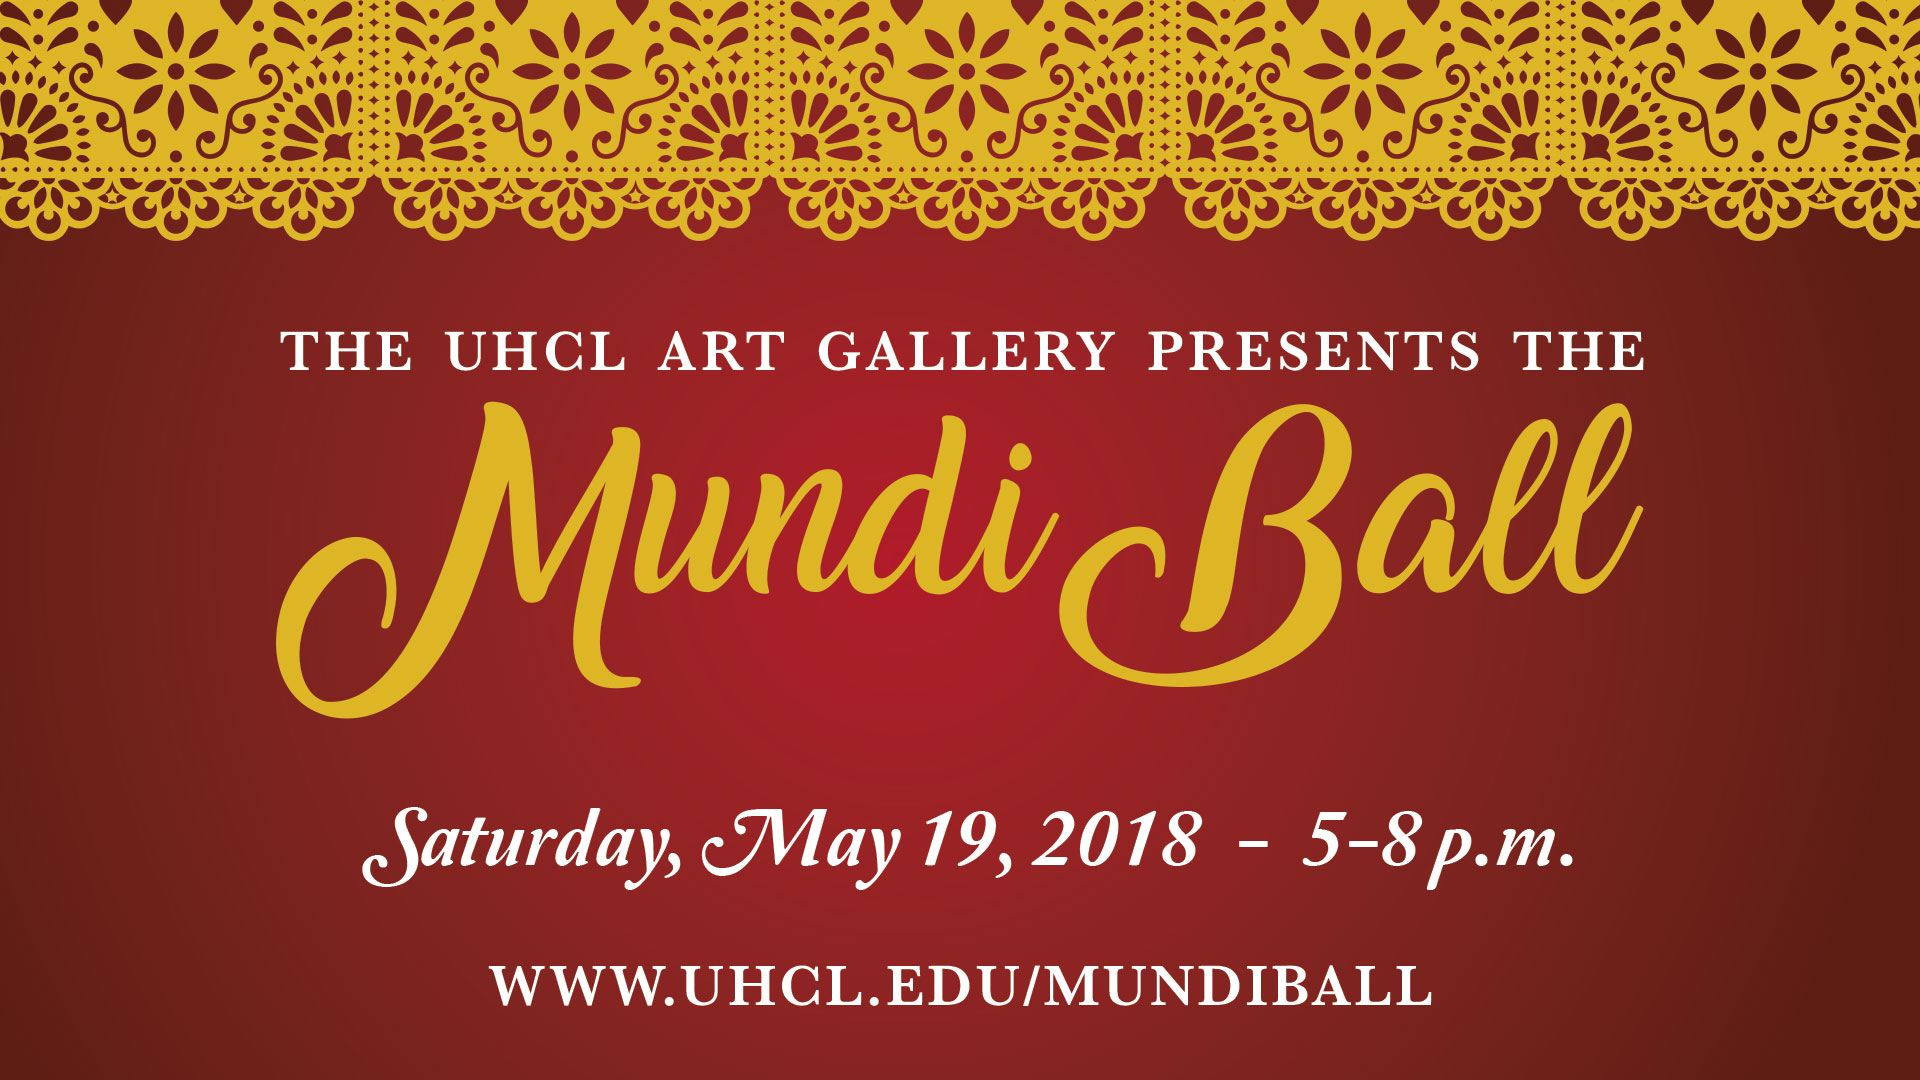 UHCL's Art Gallery plans Spanish-themed fundraising ball